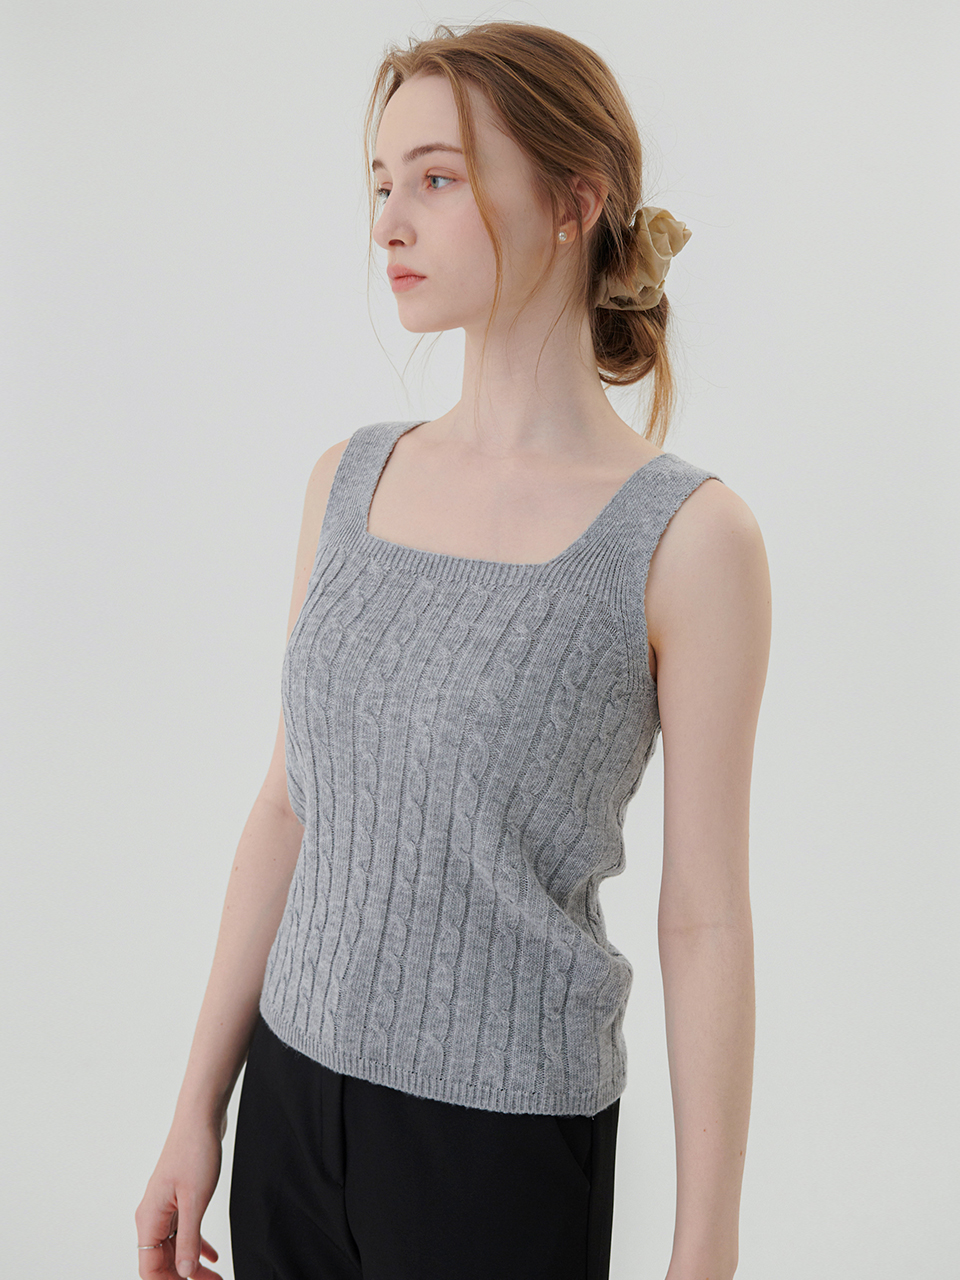 Cooing Knit Sleeveless